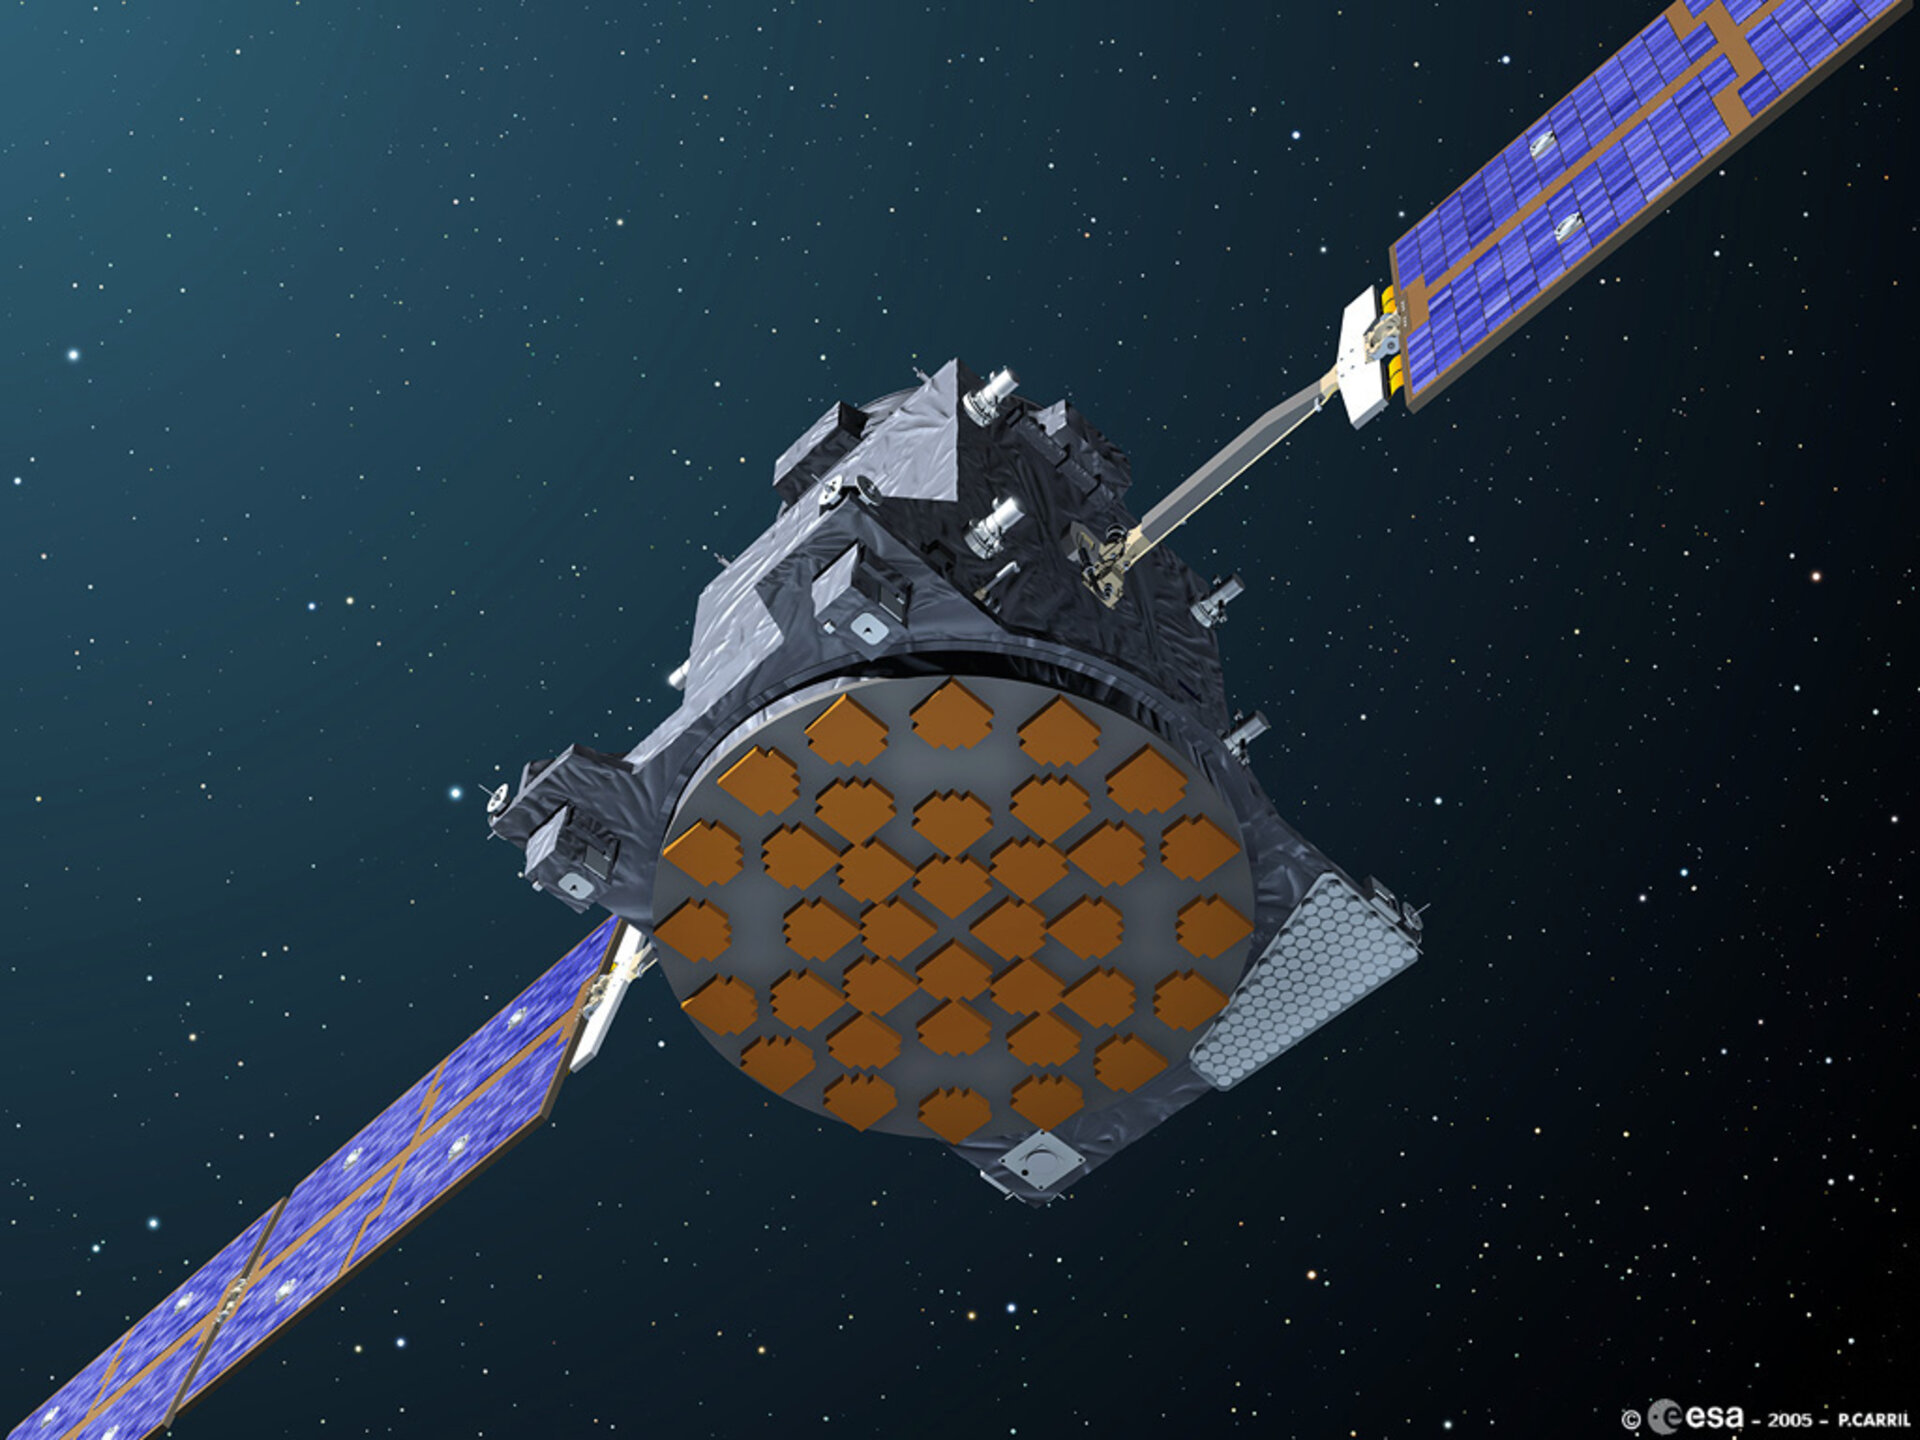 GIOVE-A has started transmitting the first Galileo signals